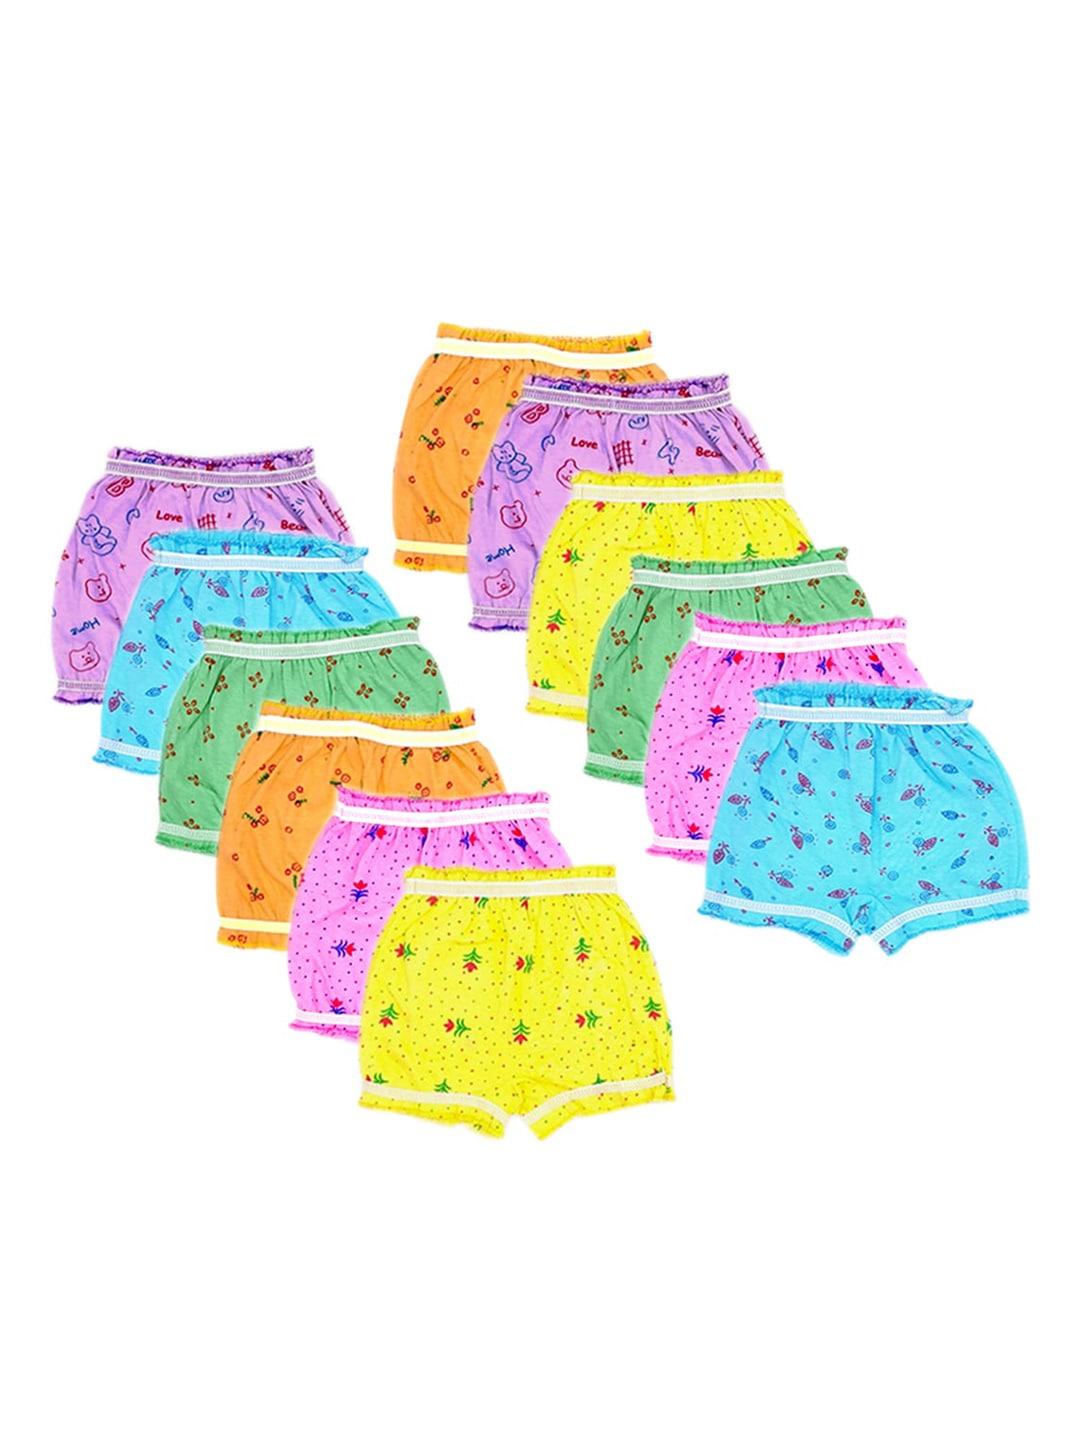 baesd kids pack of 12 printed cotton bloomer briefs